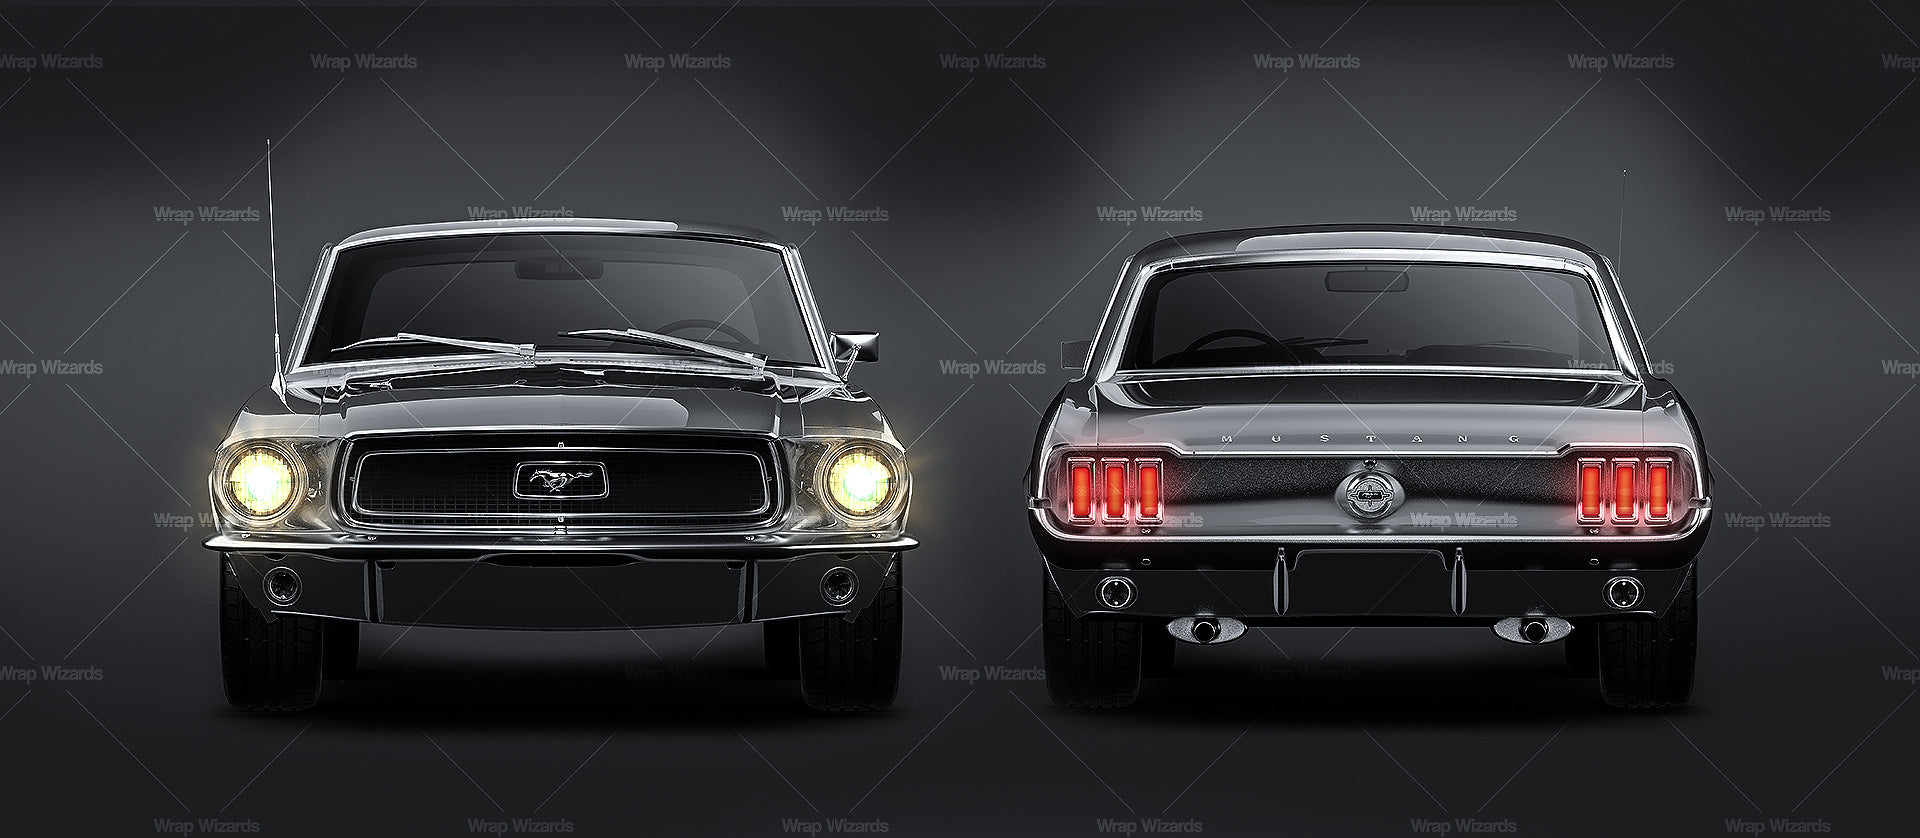 Ford Mustang '68 glossy finish - all sides Car Mockup Template.psd